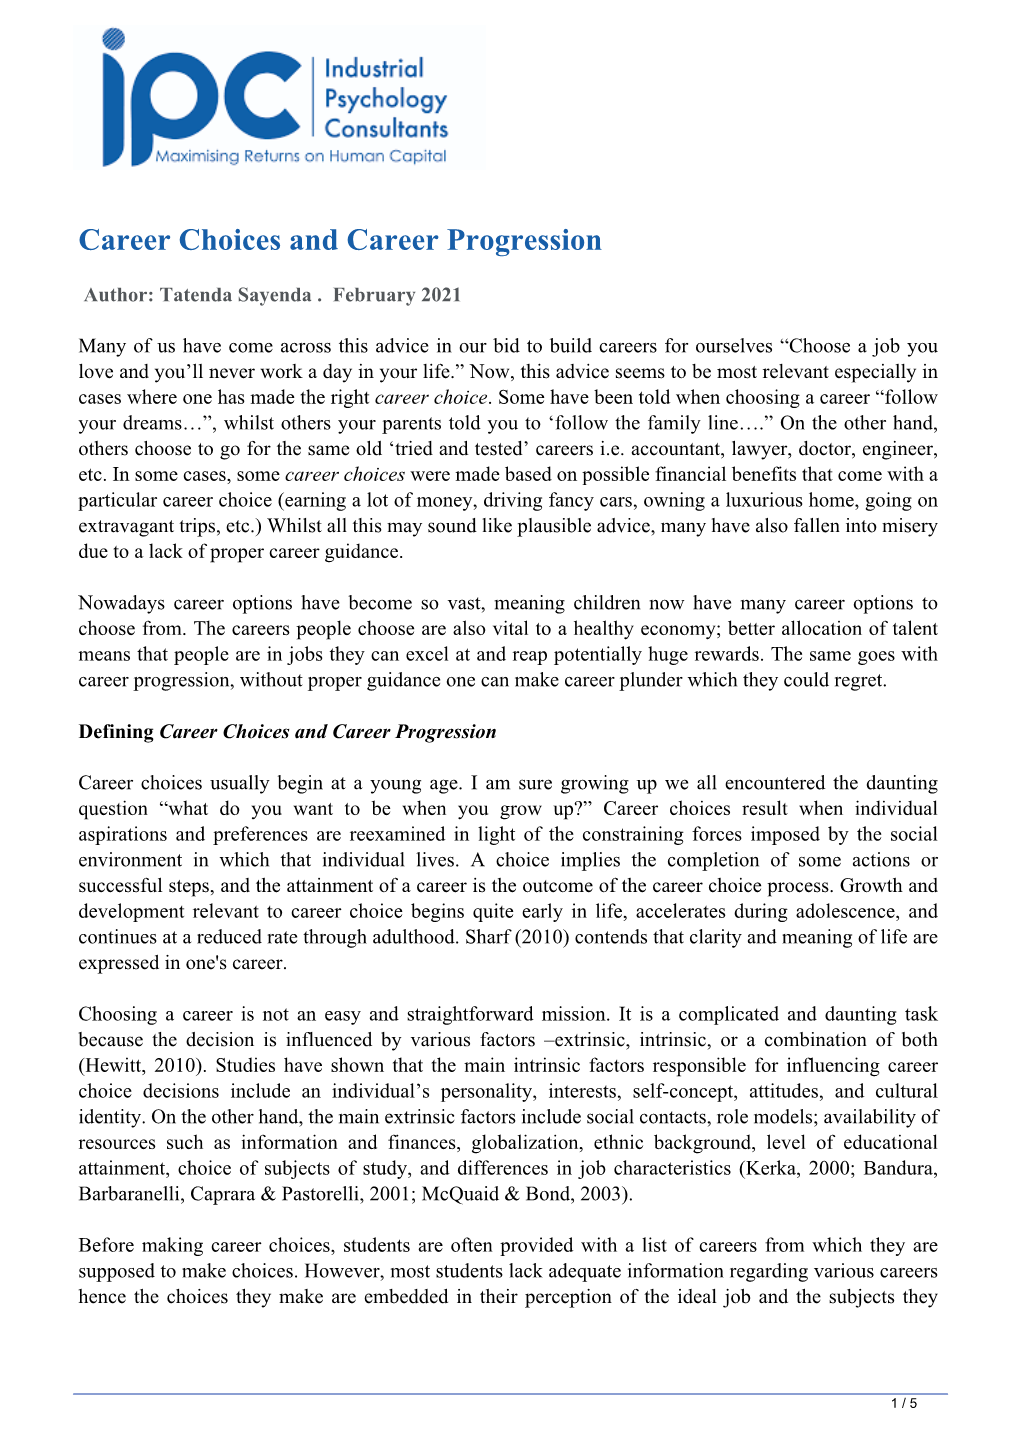 Career Choices and Career Progression